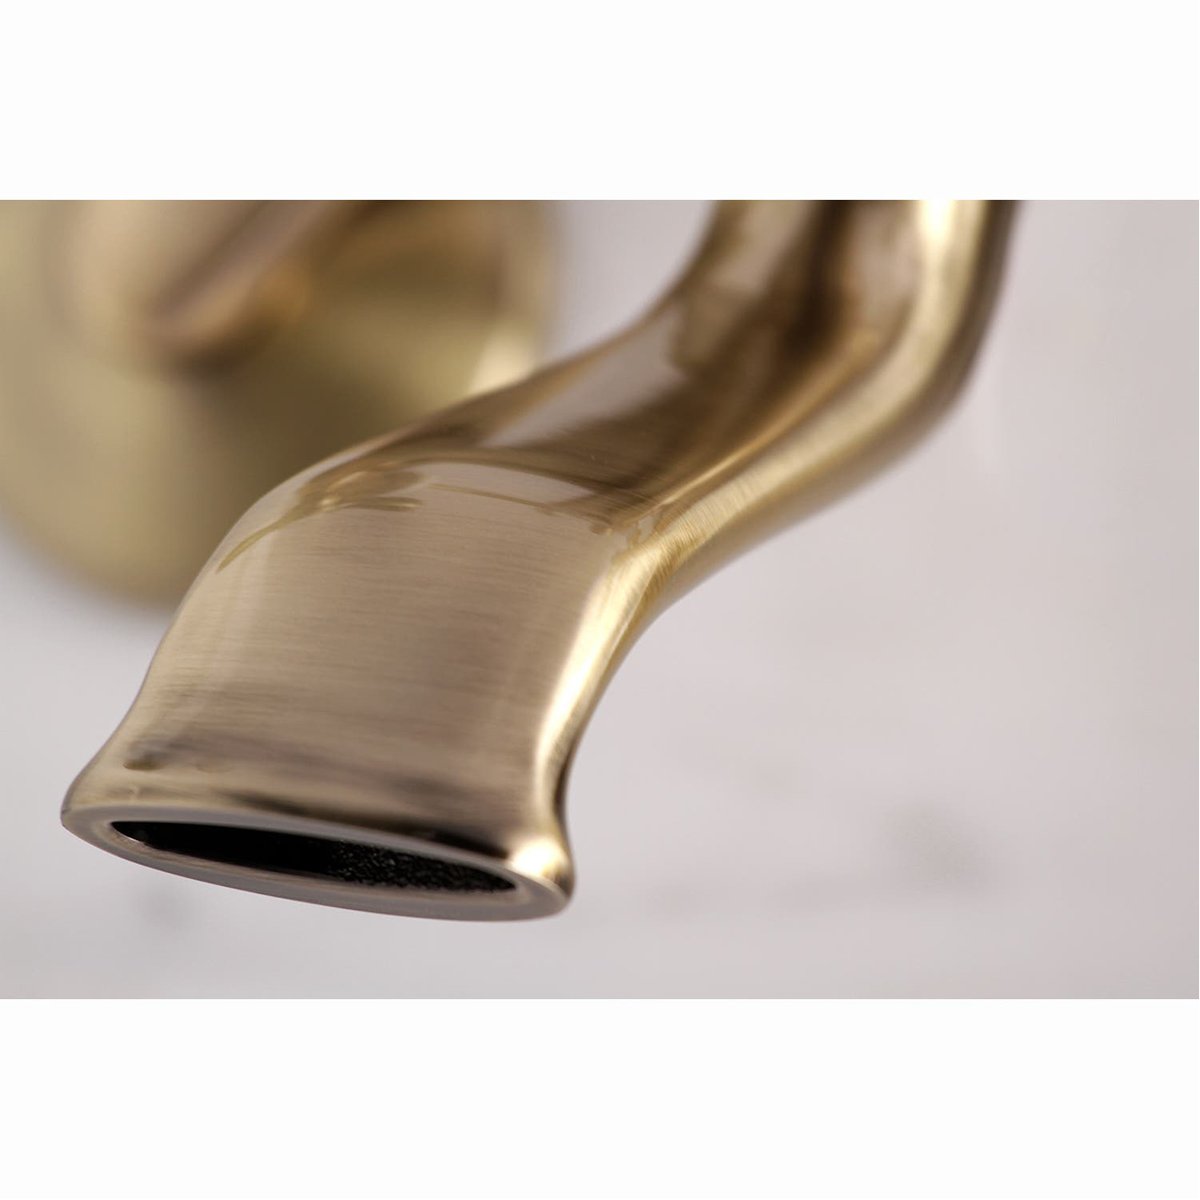 Kingston Brass Tub Wall Mount Clawfoot Tub Faucet with Hand Shower